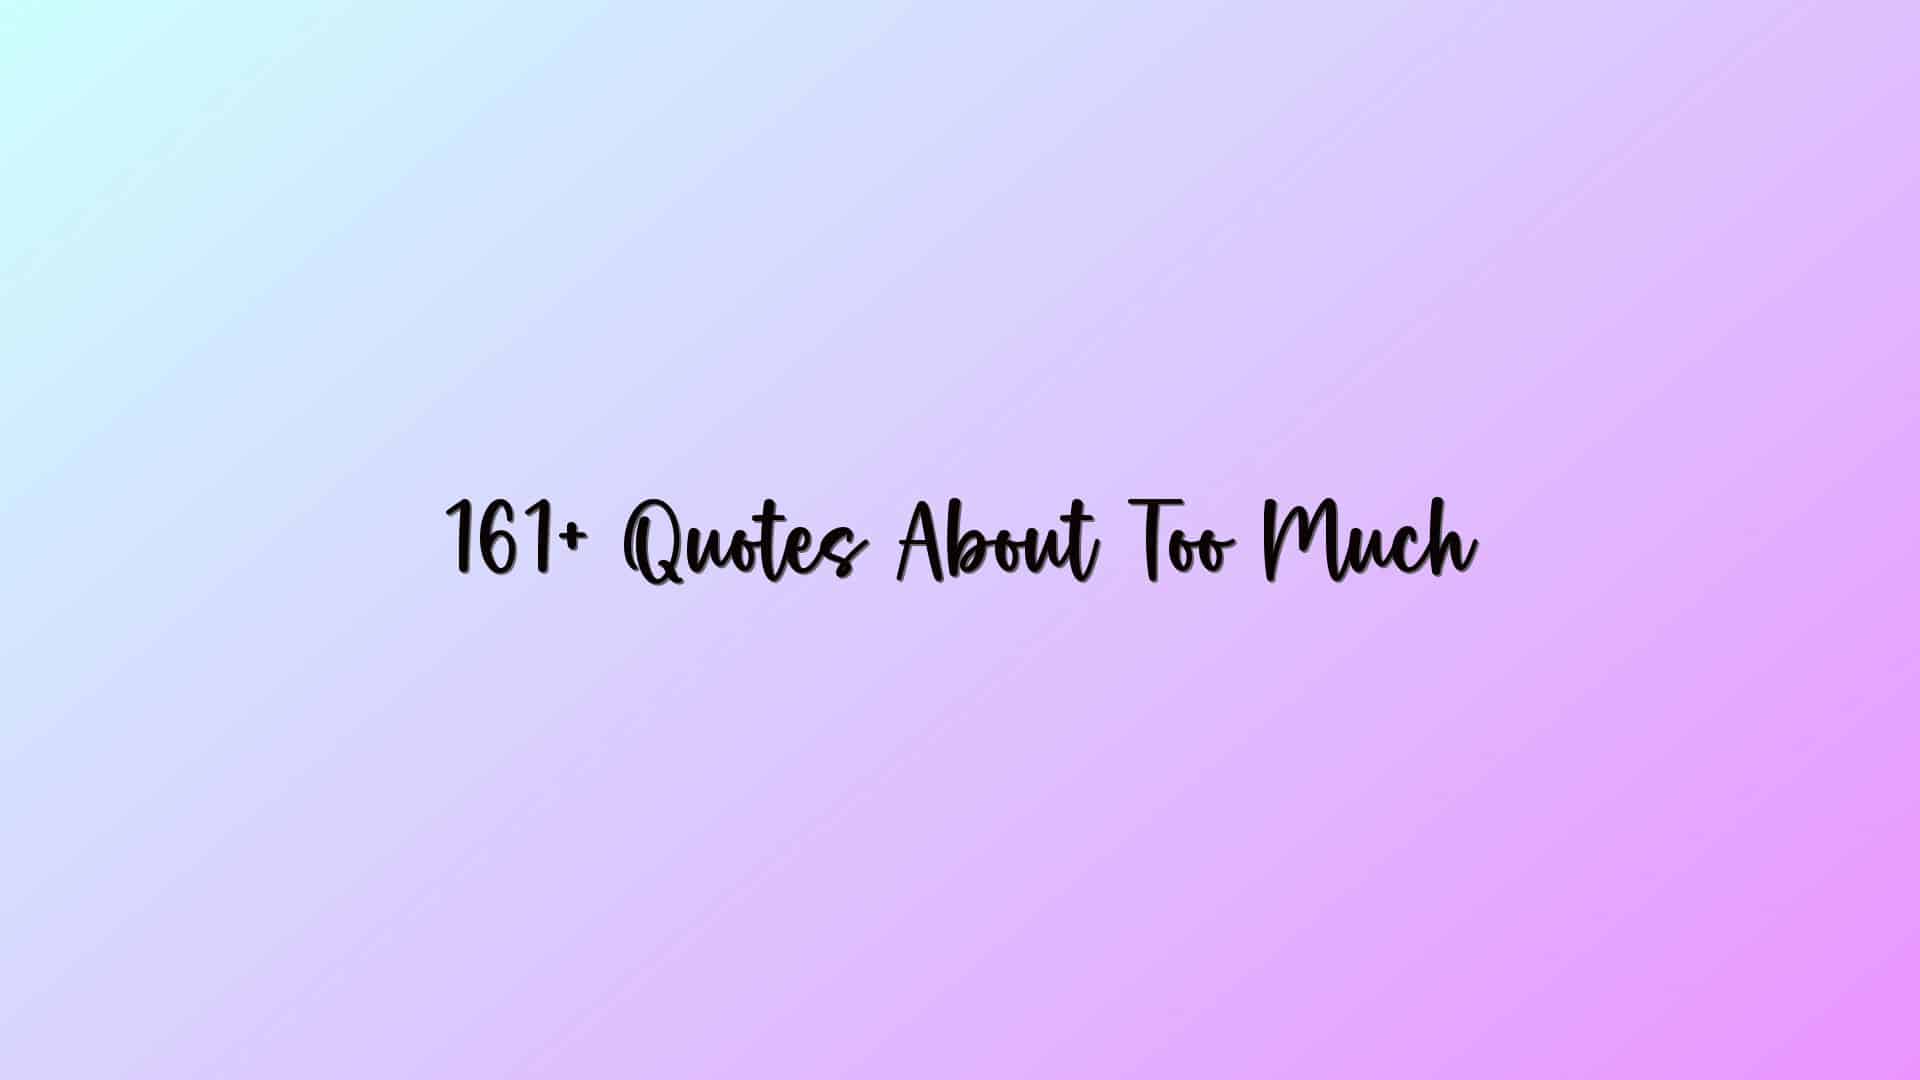 161+ Quotes About Too Much